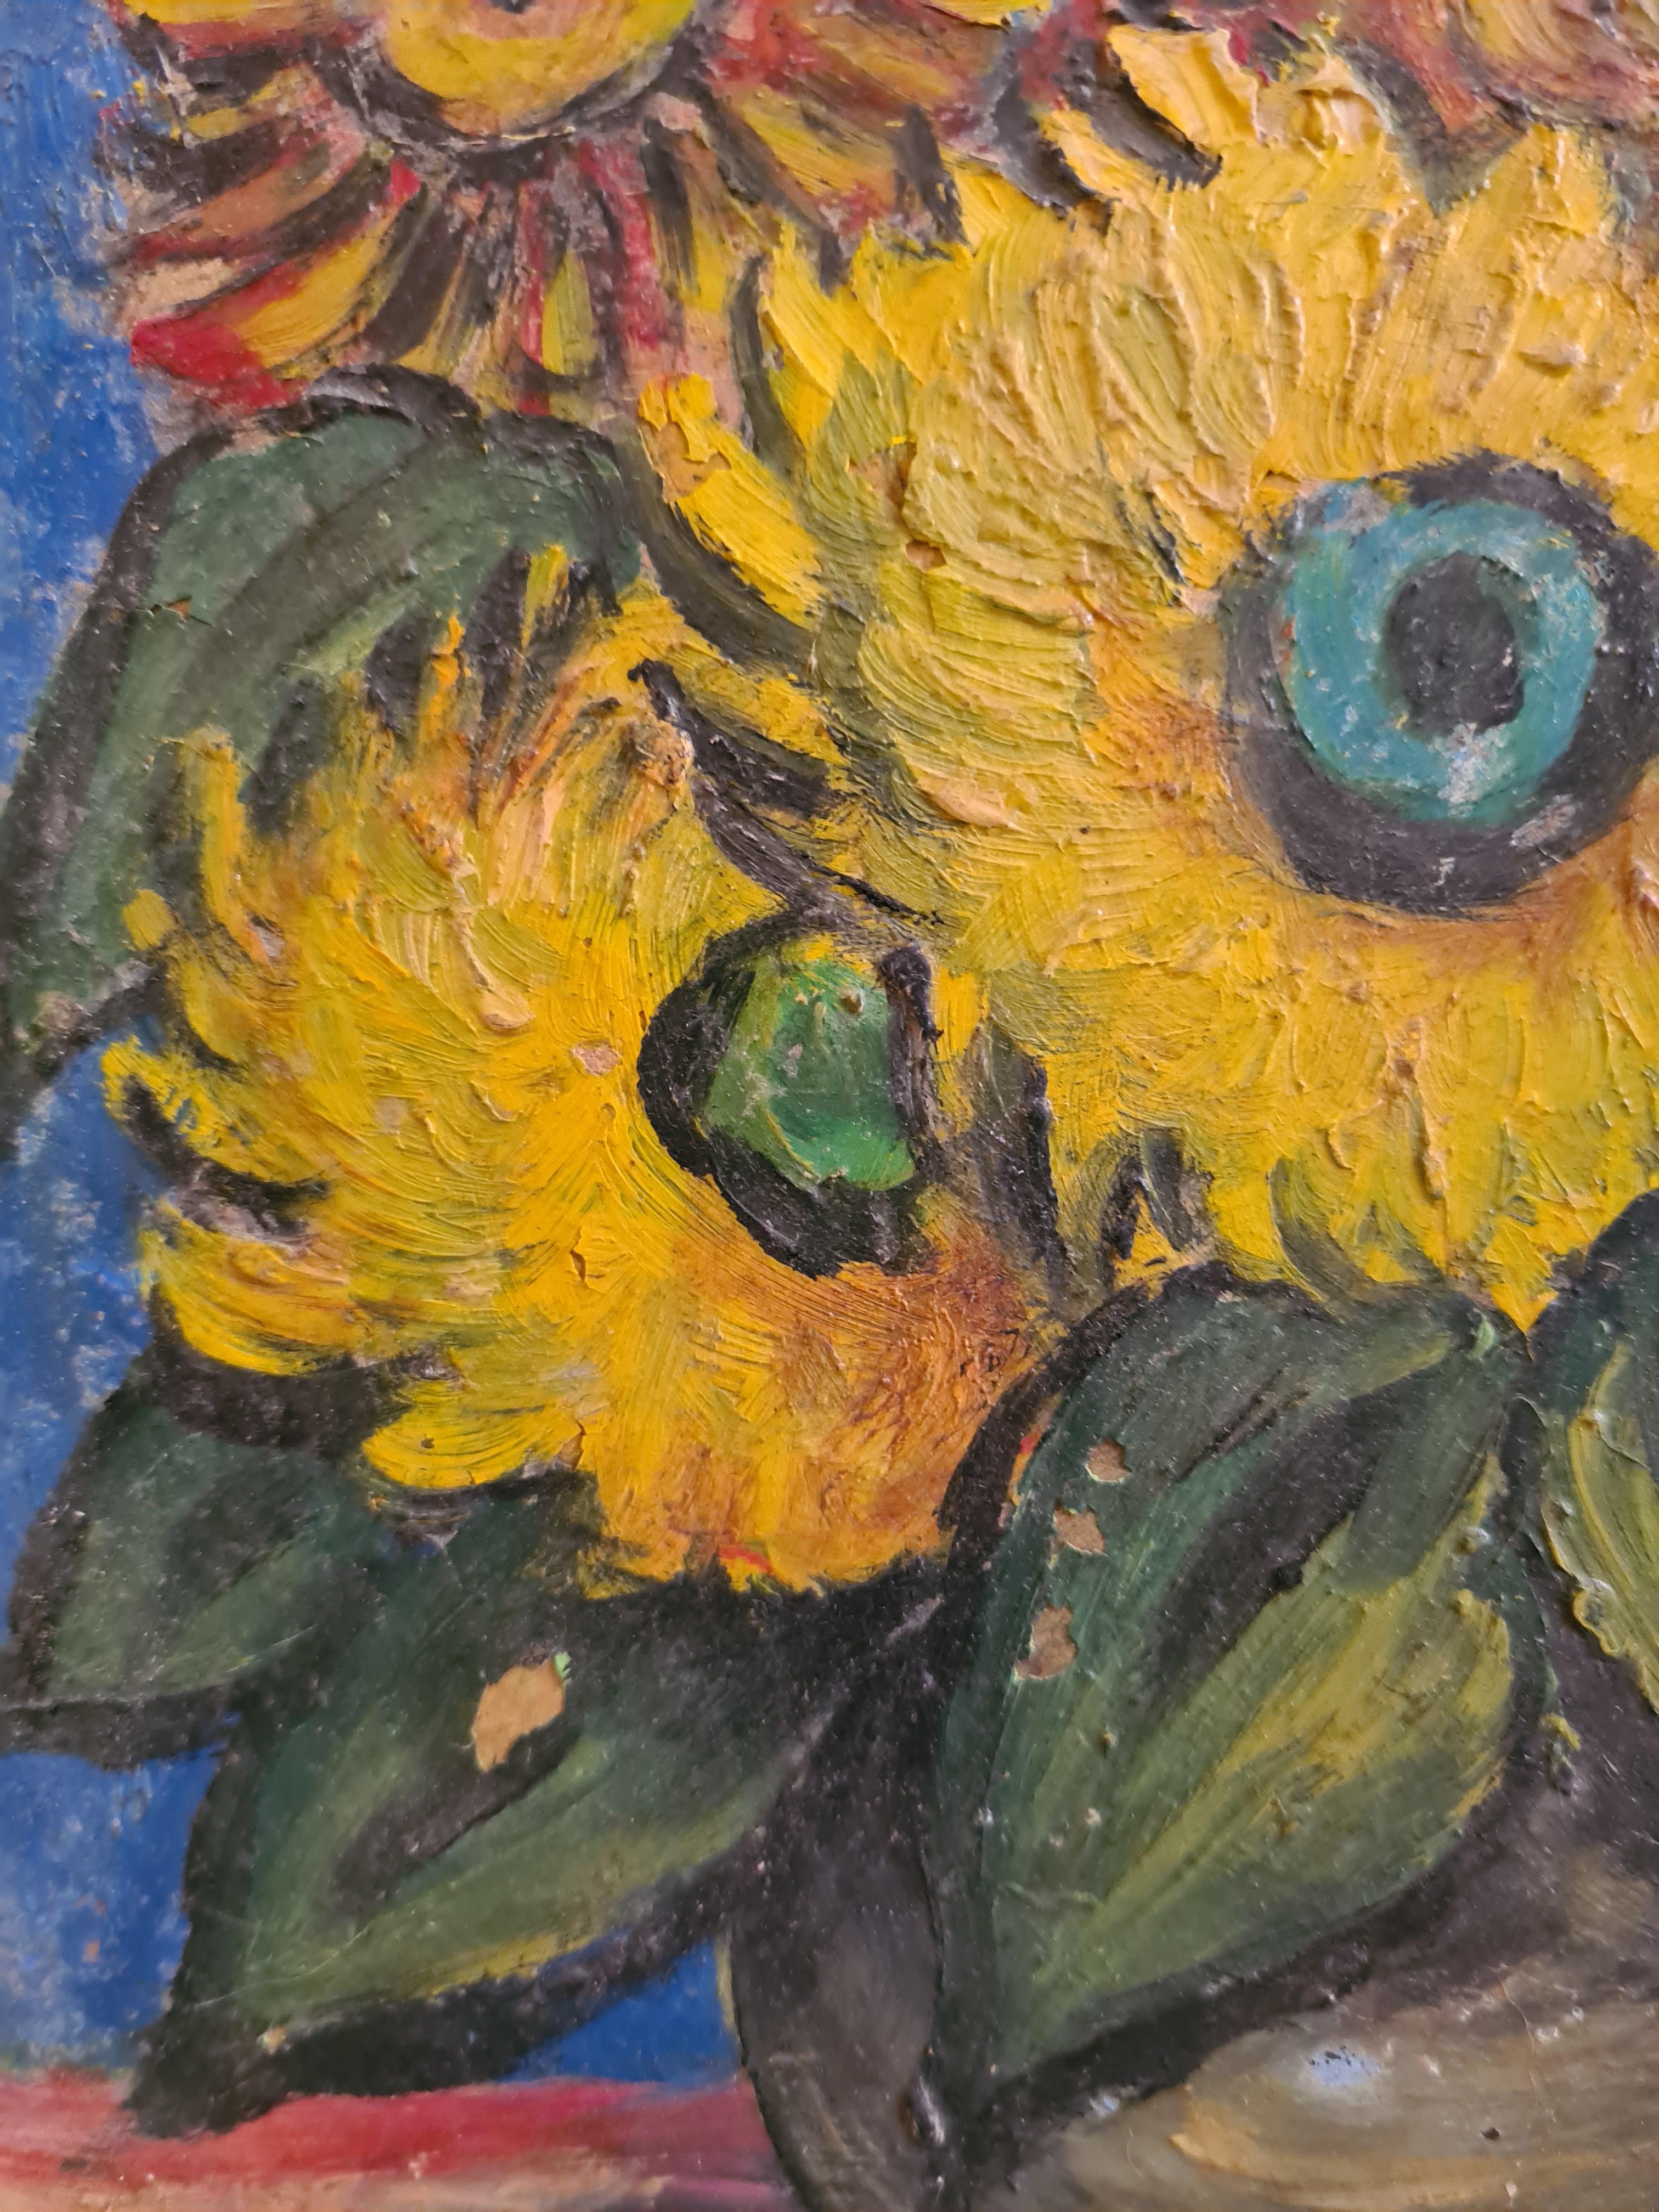 Sunflowers. 'Bateau-Lavoir' Movement Oil on Board, Hommage to Van Gogh. For Sale 1